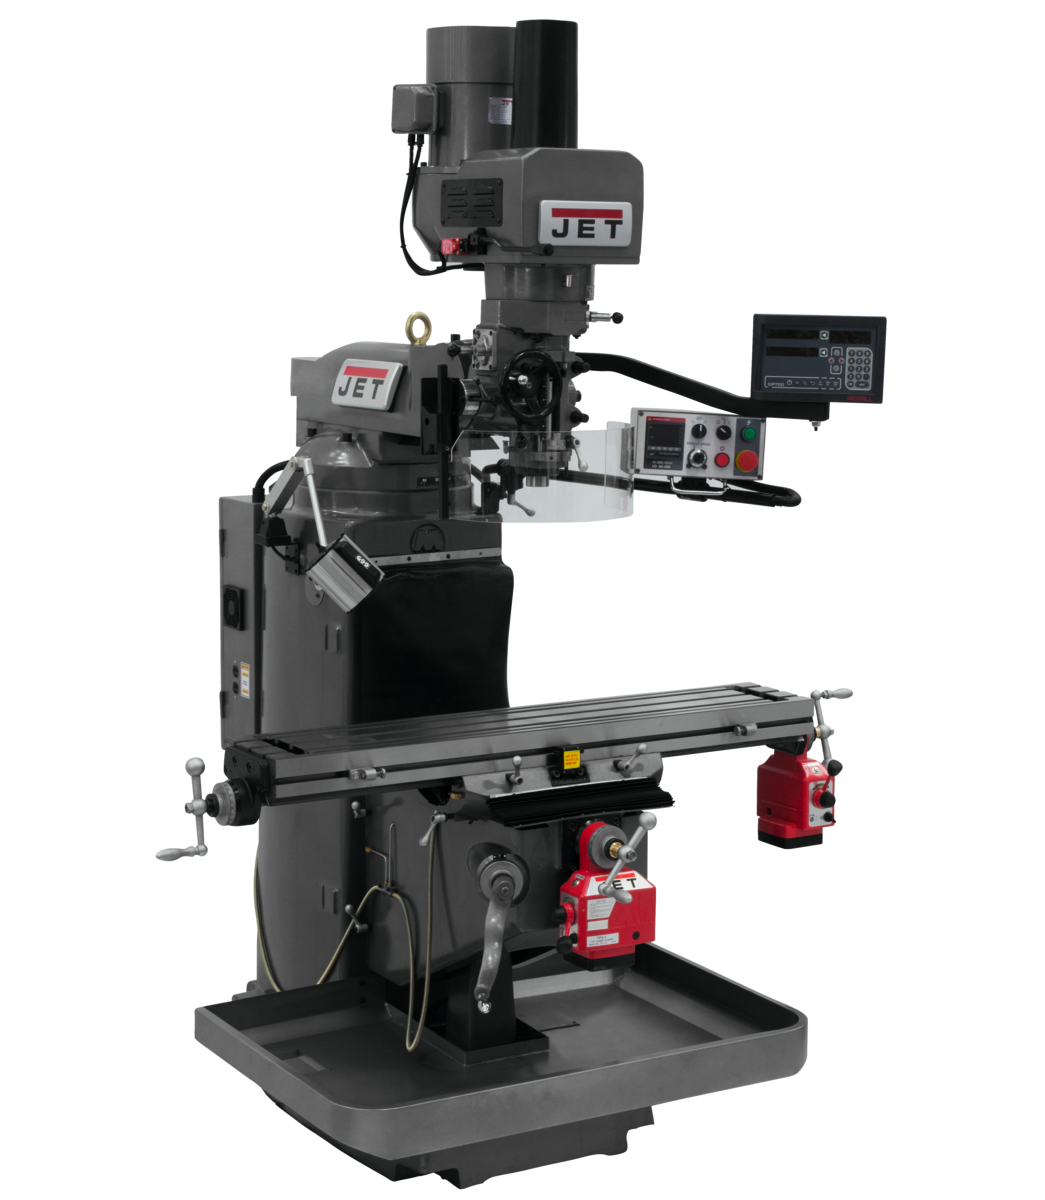 JTM-949EVS Mill With 3-Axis Newall DP700 DRO (Knee) With X and Y-Axis Powerfeeds and Air Powered Draw Bar